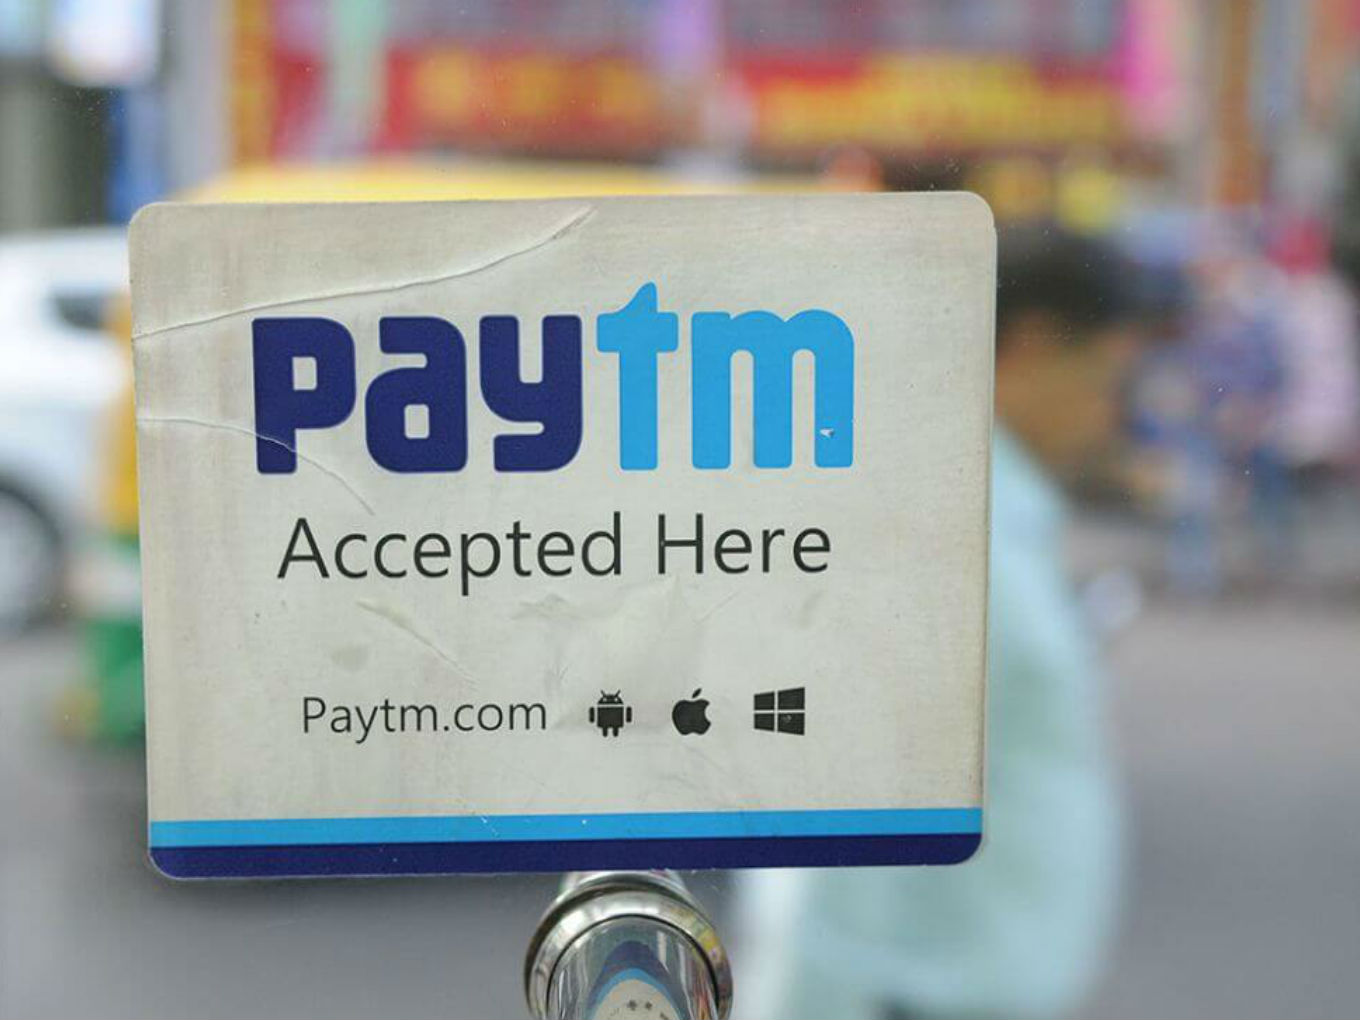 Paytm Payment Gateway Adds Bulk Payments for Merchants, SMBs